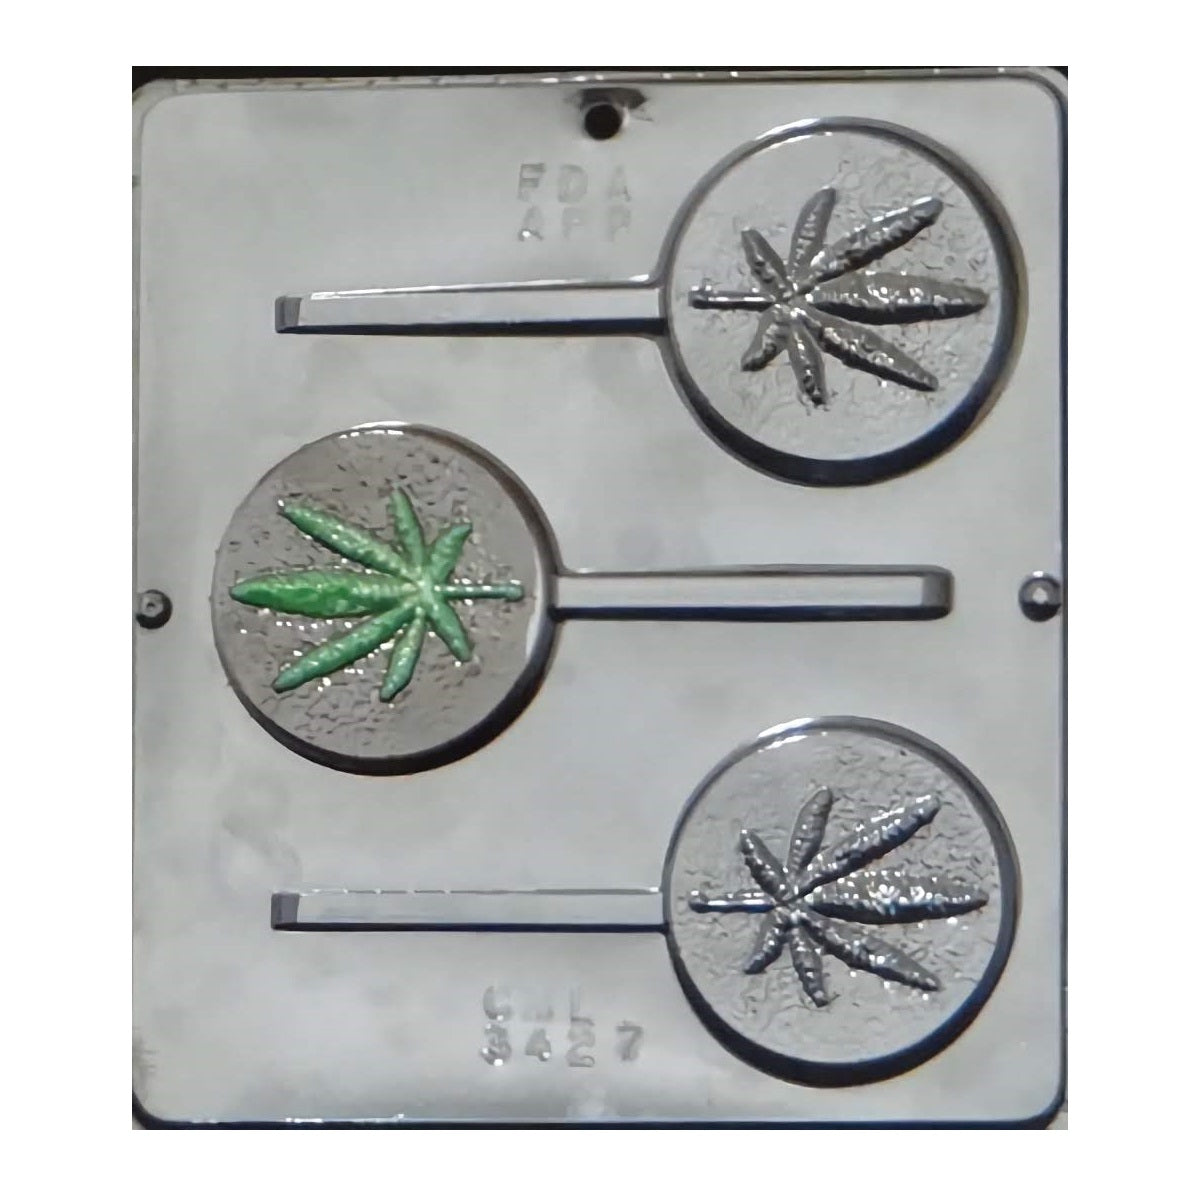 Circular lollipop chocolate mold featuring a detailed cannabis leaf design, used for making marijuana-themed edible suckers for novelty or themed events.